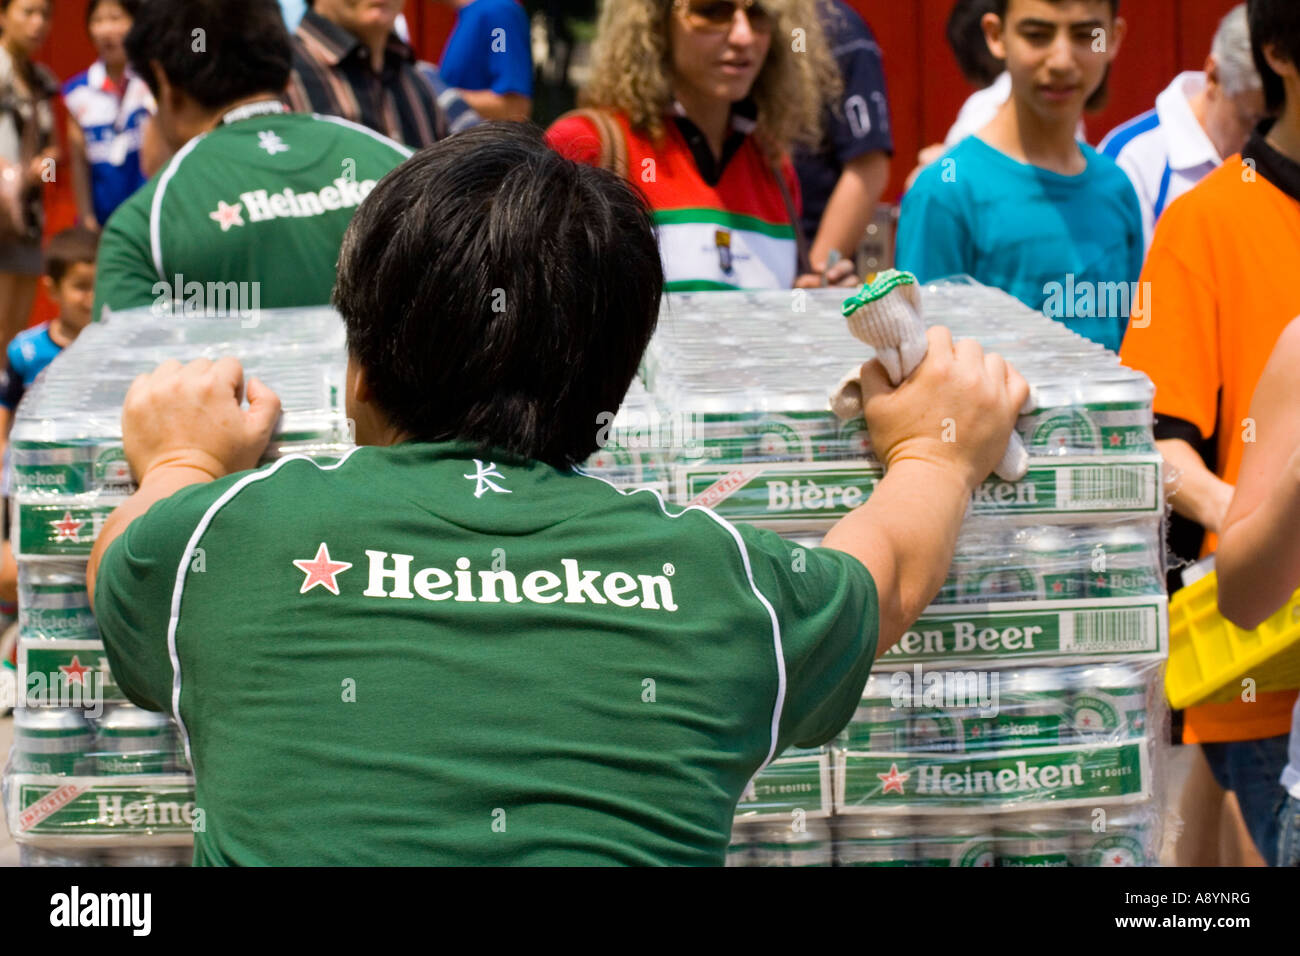 Heineken Employee Pushing Many Cases of Cans of Beer Stock Photo